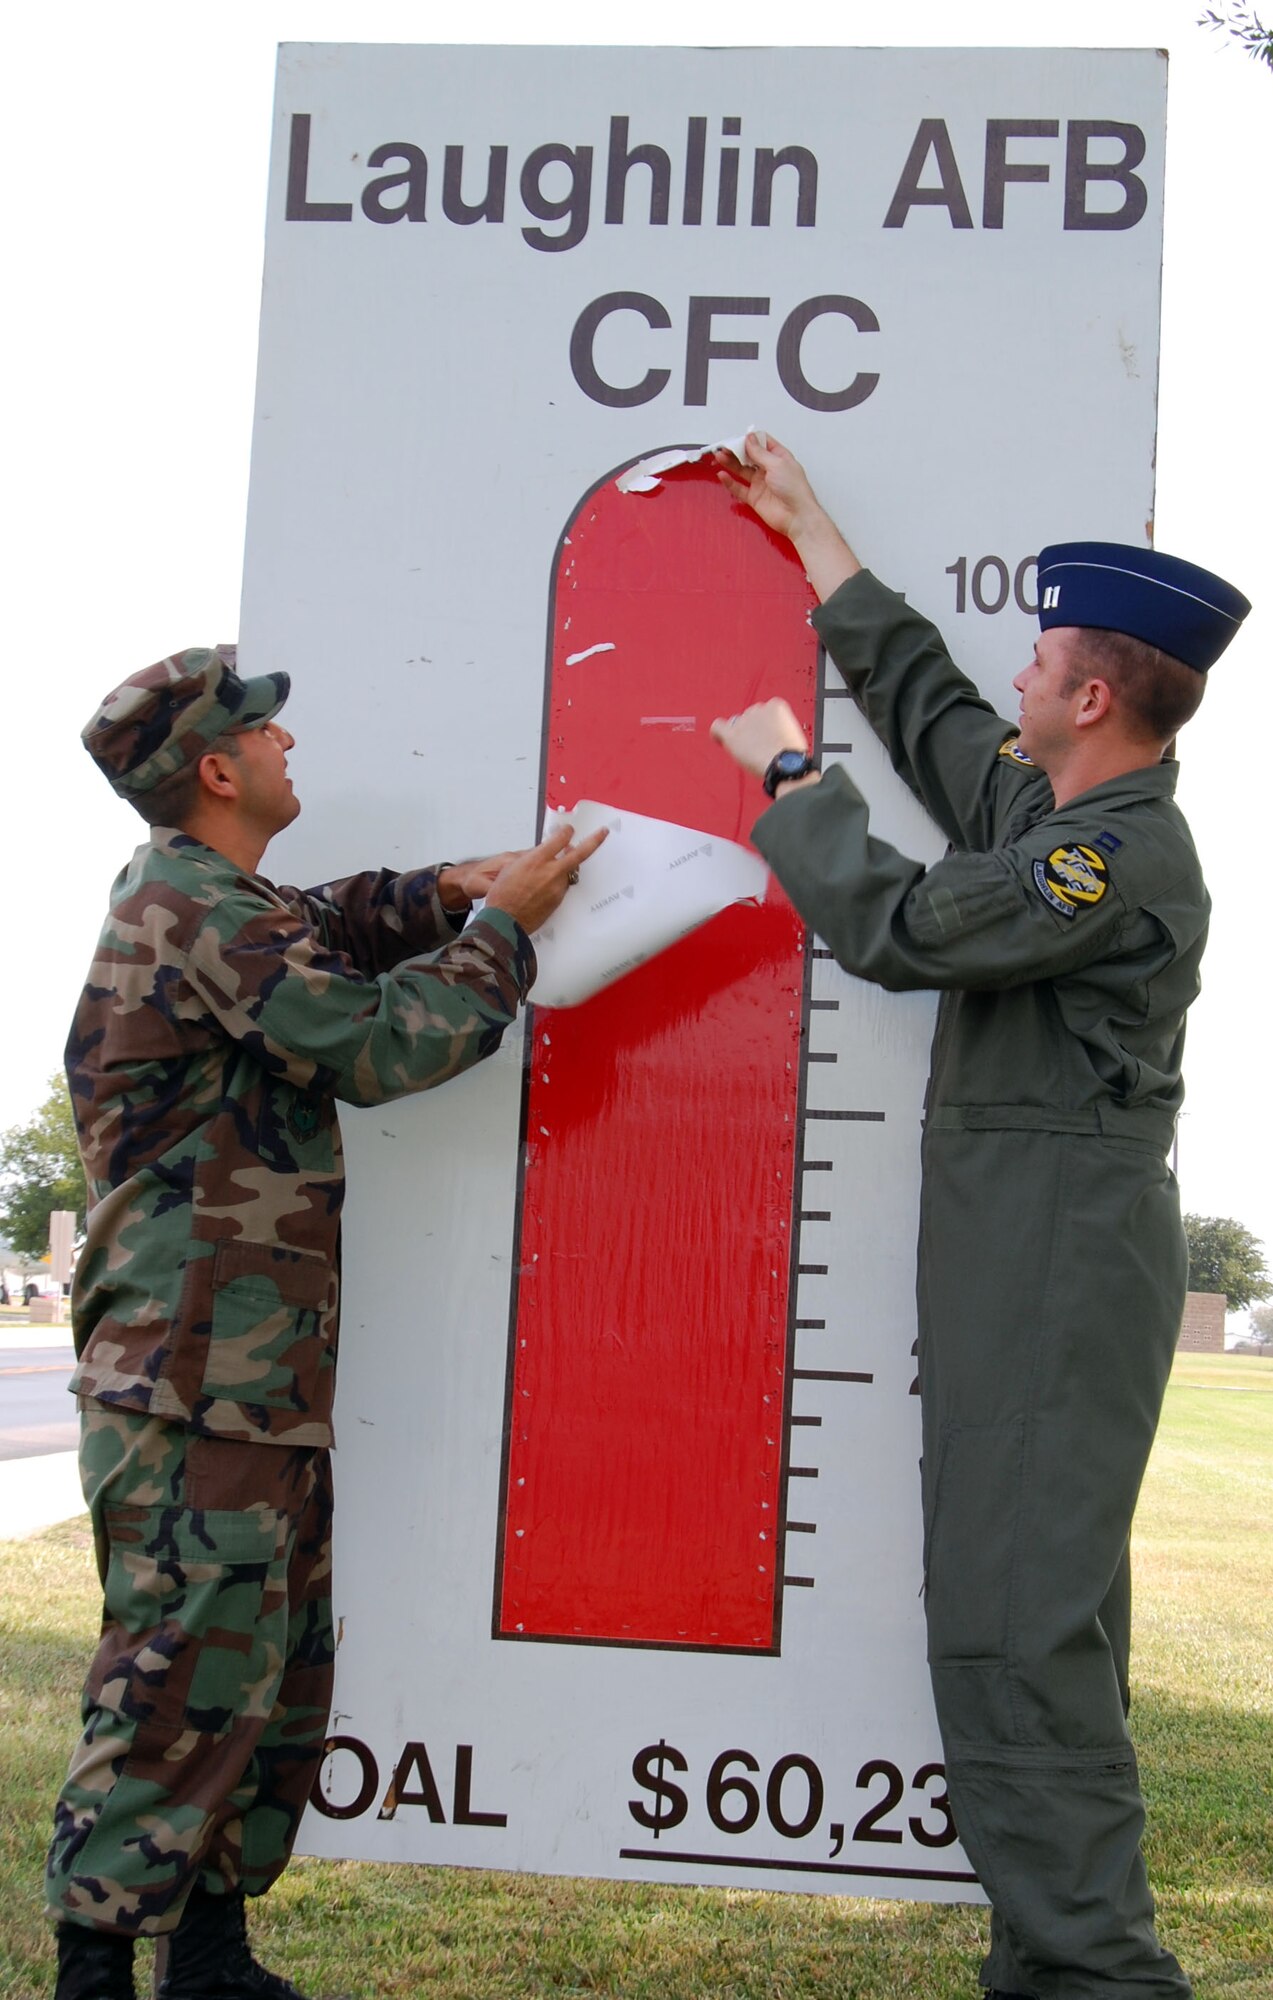 LAUGHLIN AIR FORCE BASE, Texas -- 1st. Lt. Eric Alonso-Bernal, 47th Contracting Squadron, and Capt. Nate Cook , 85th Flying Training Wing, tear off the last part of the Combined Federal Campaign chart to reveal the 100 percent goal Laughlin reached last week. "We smashed our goal of $60,230, and we?re currently at 113 percent all thanks to the amazing generosity of the Laughlin members," said Captain Cook. "Last year we reached nearly $100,000, this campaign ha the potential to reach the same." Laughlin's CFC will be excepting donations until Oct. 26, contact your CFC representative to make your donation. (U.S. Air Force photo by Airman Sara Csurilla)